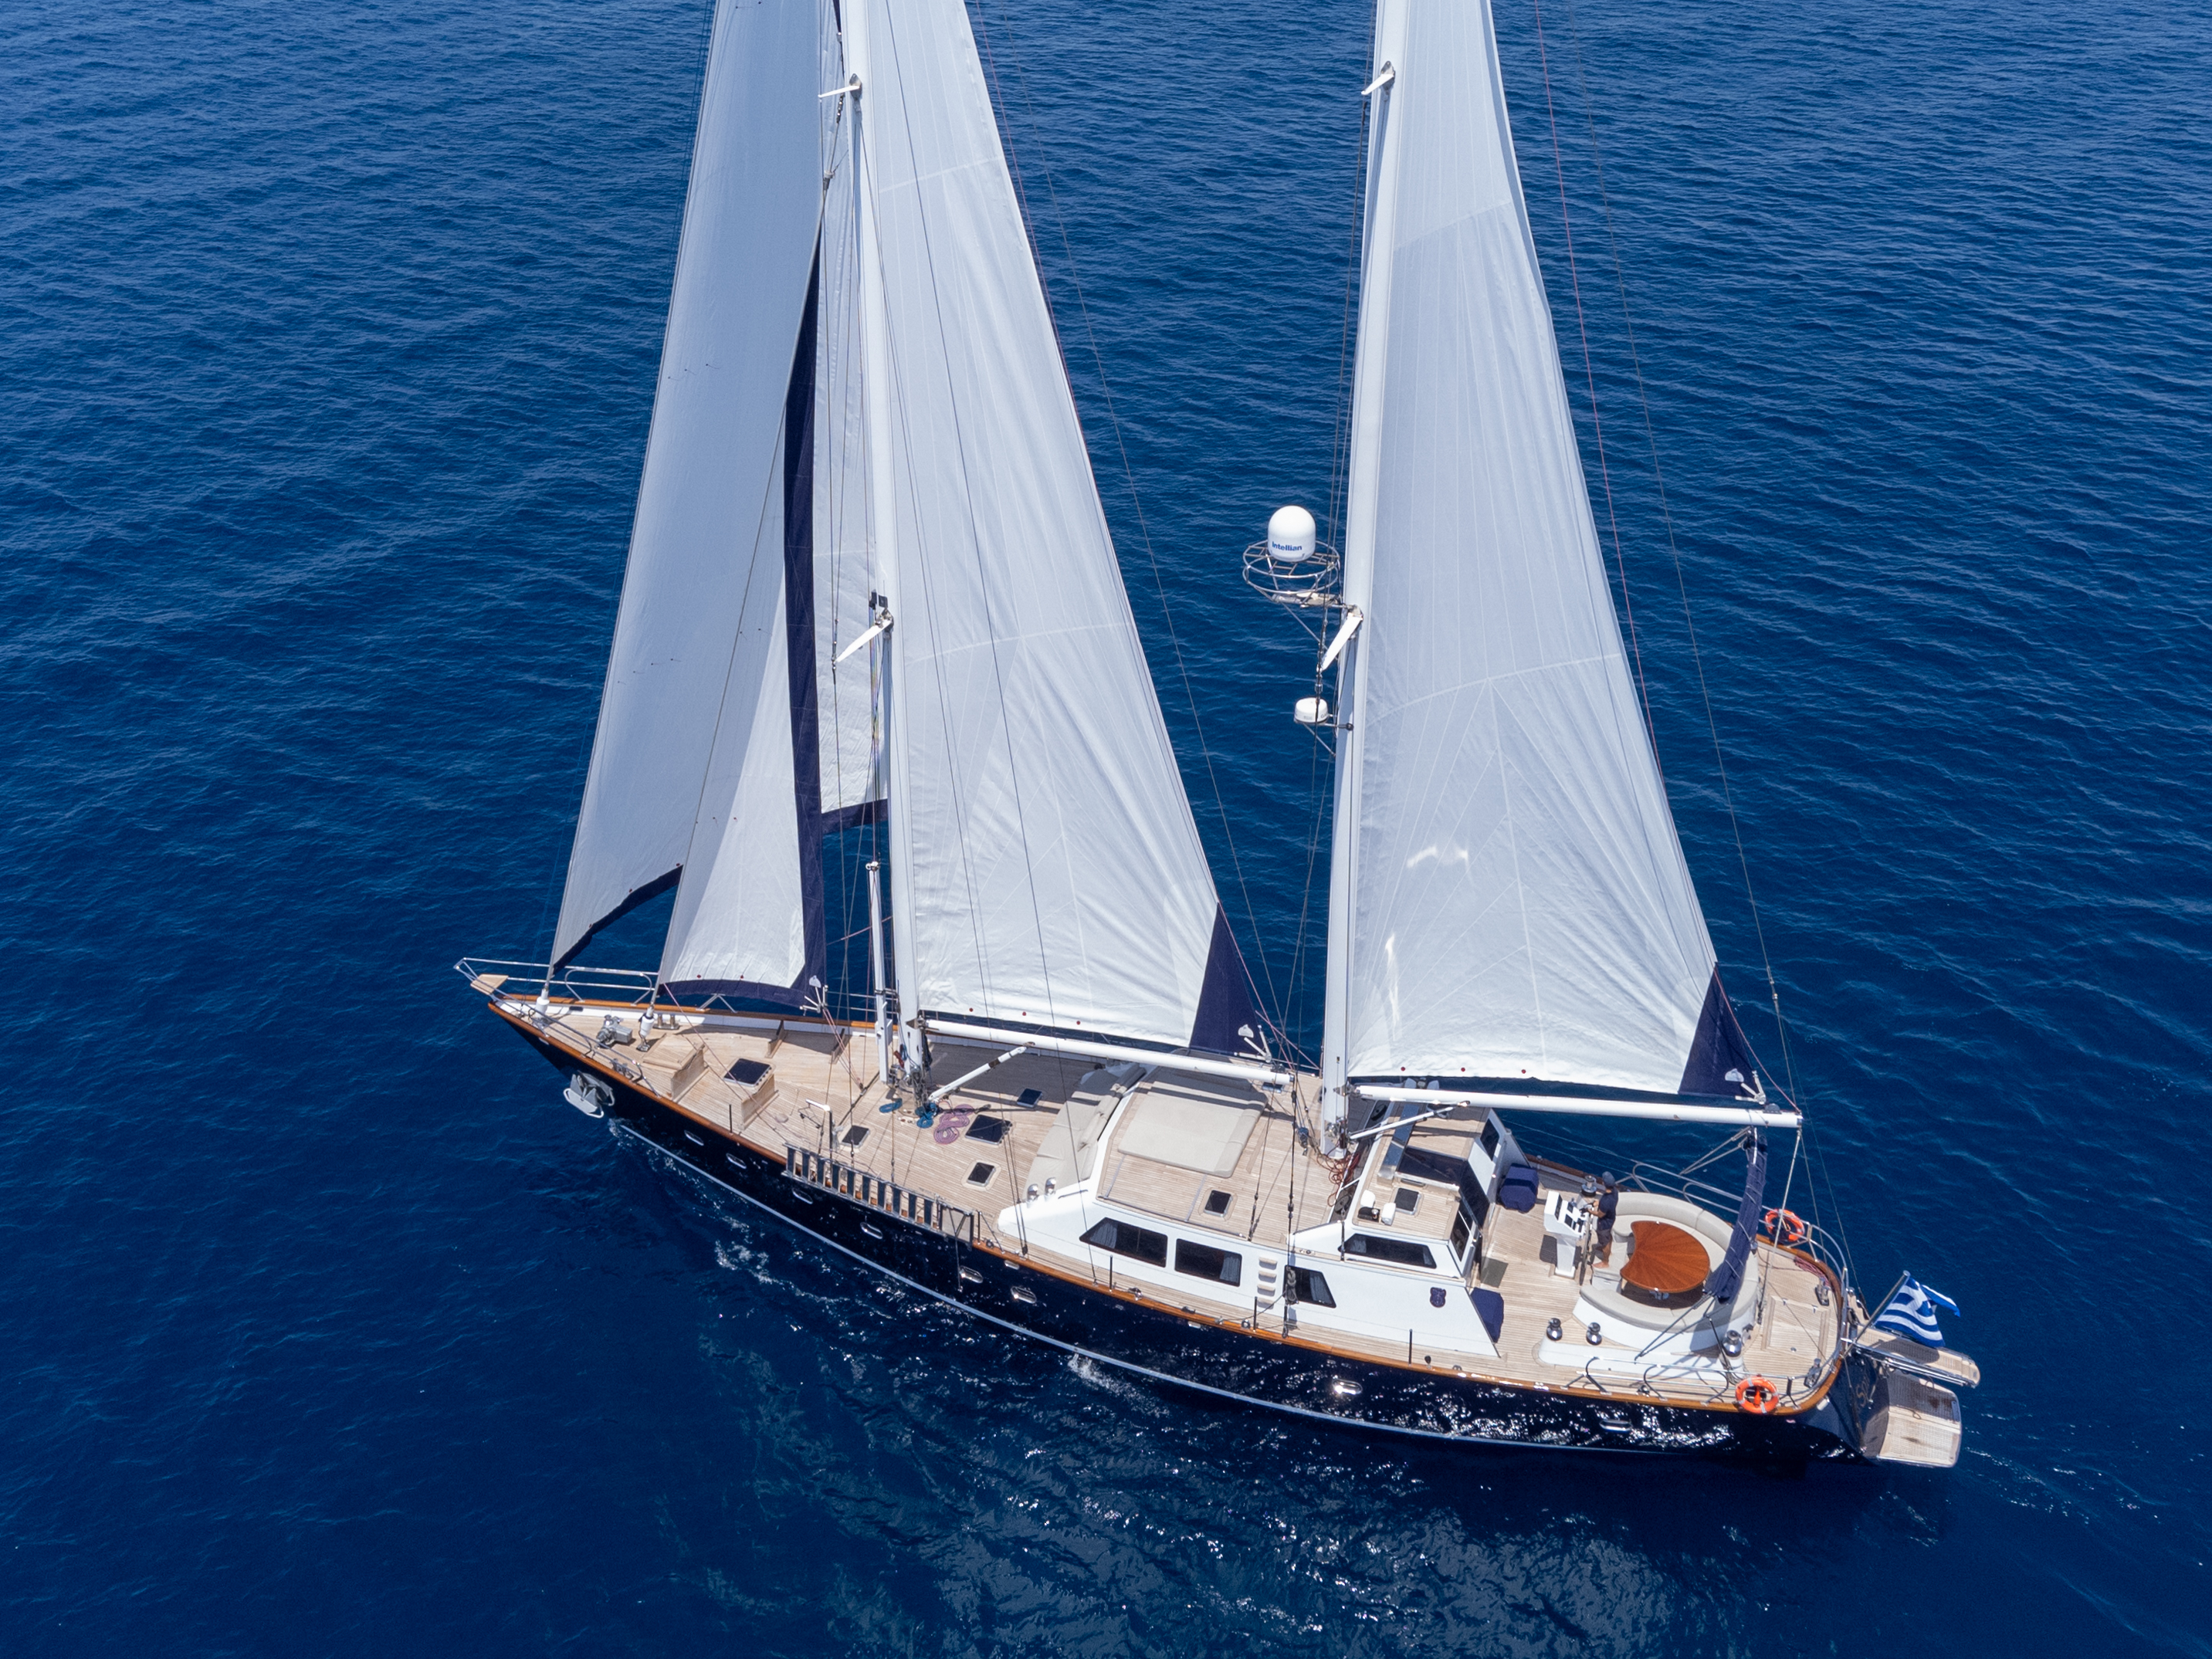 CCYD 85 - Superyacht charter St Martin & Boat hire in Greece Athens and Saronic Gulf Athens Piraeus Marina Zea 6